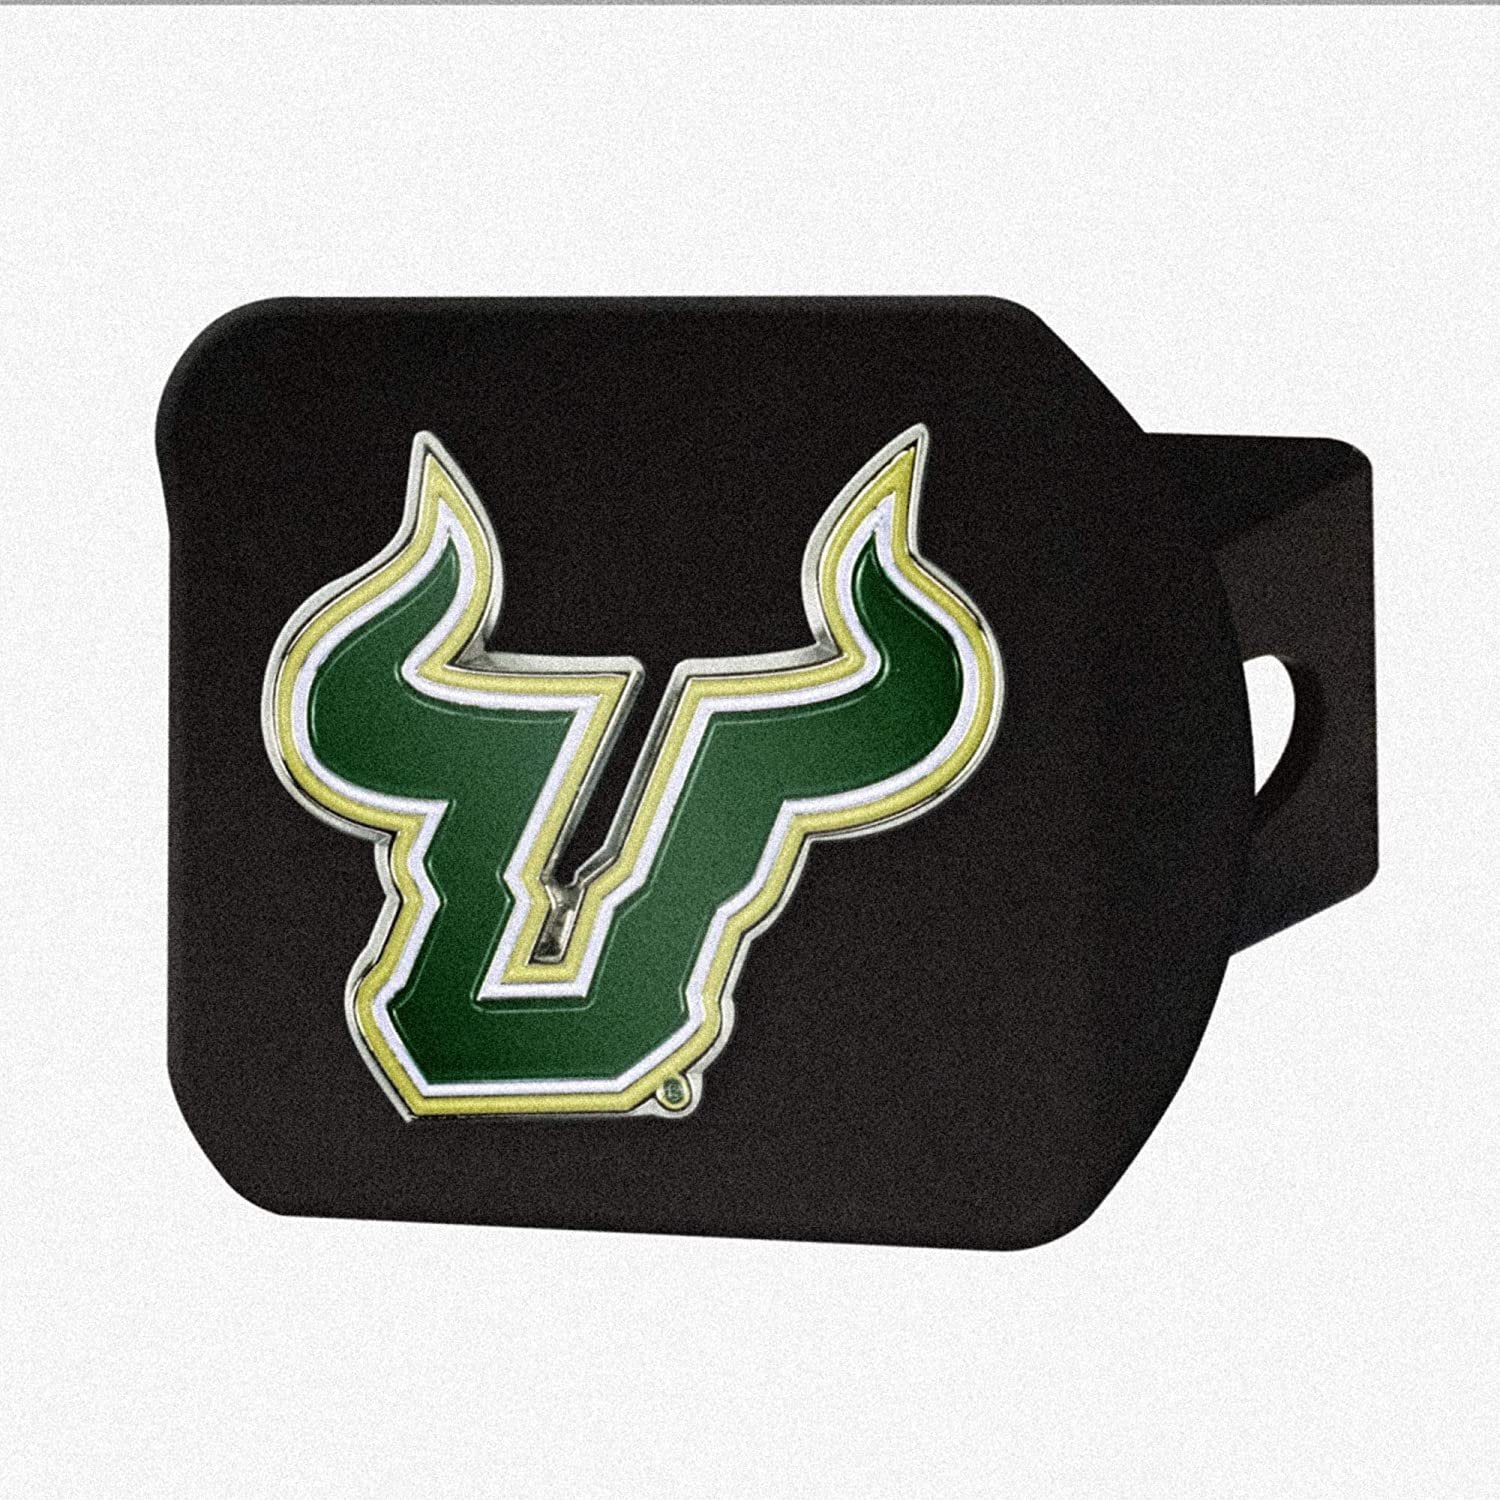 South Florida Bulls USF Hitch Cover Solid Black Metal with Raised Color Metal Emblem 2" Square Type III University of